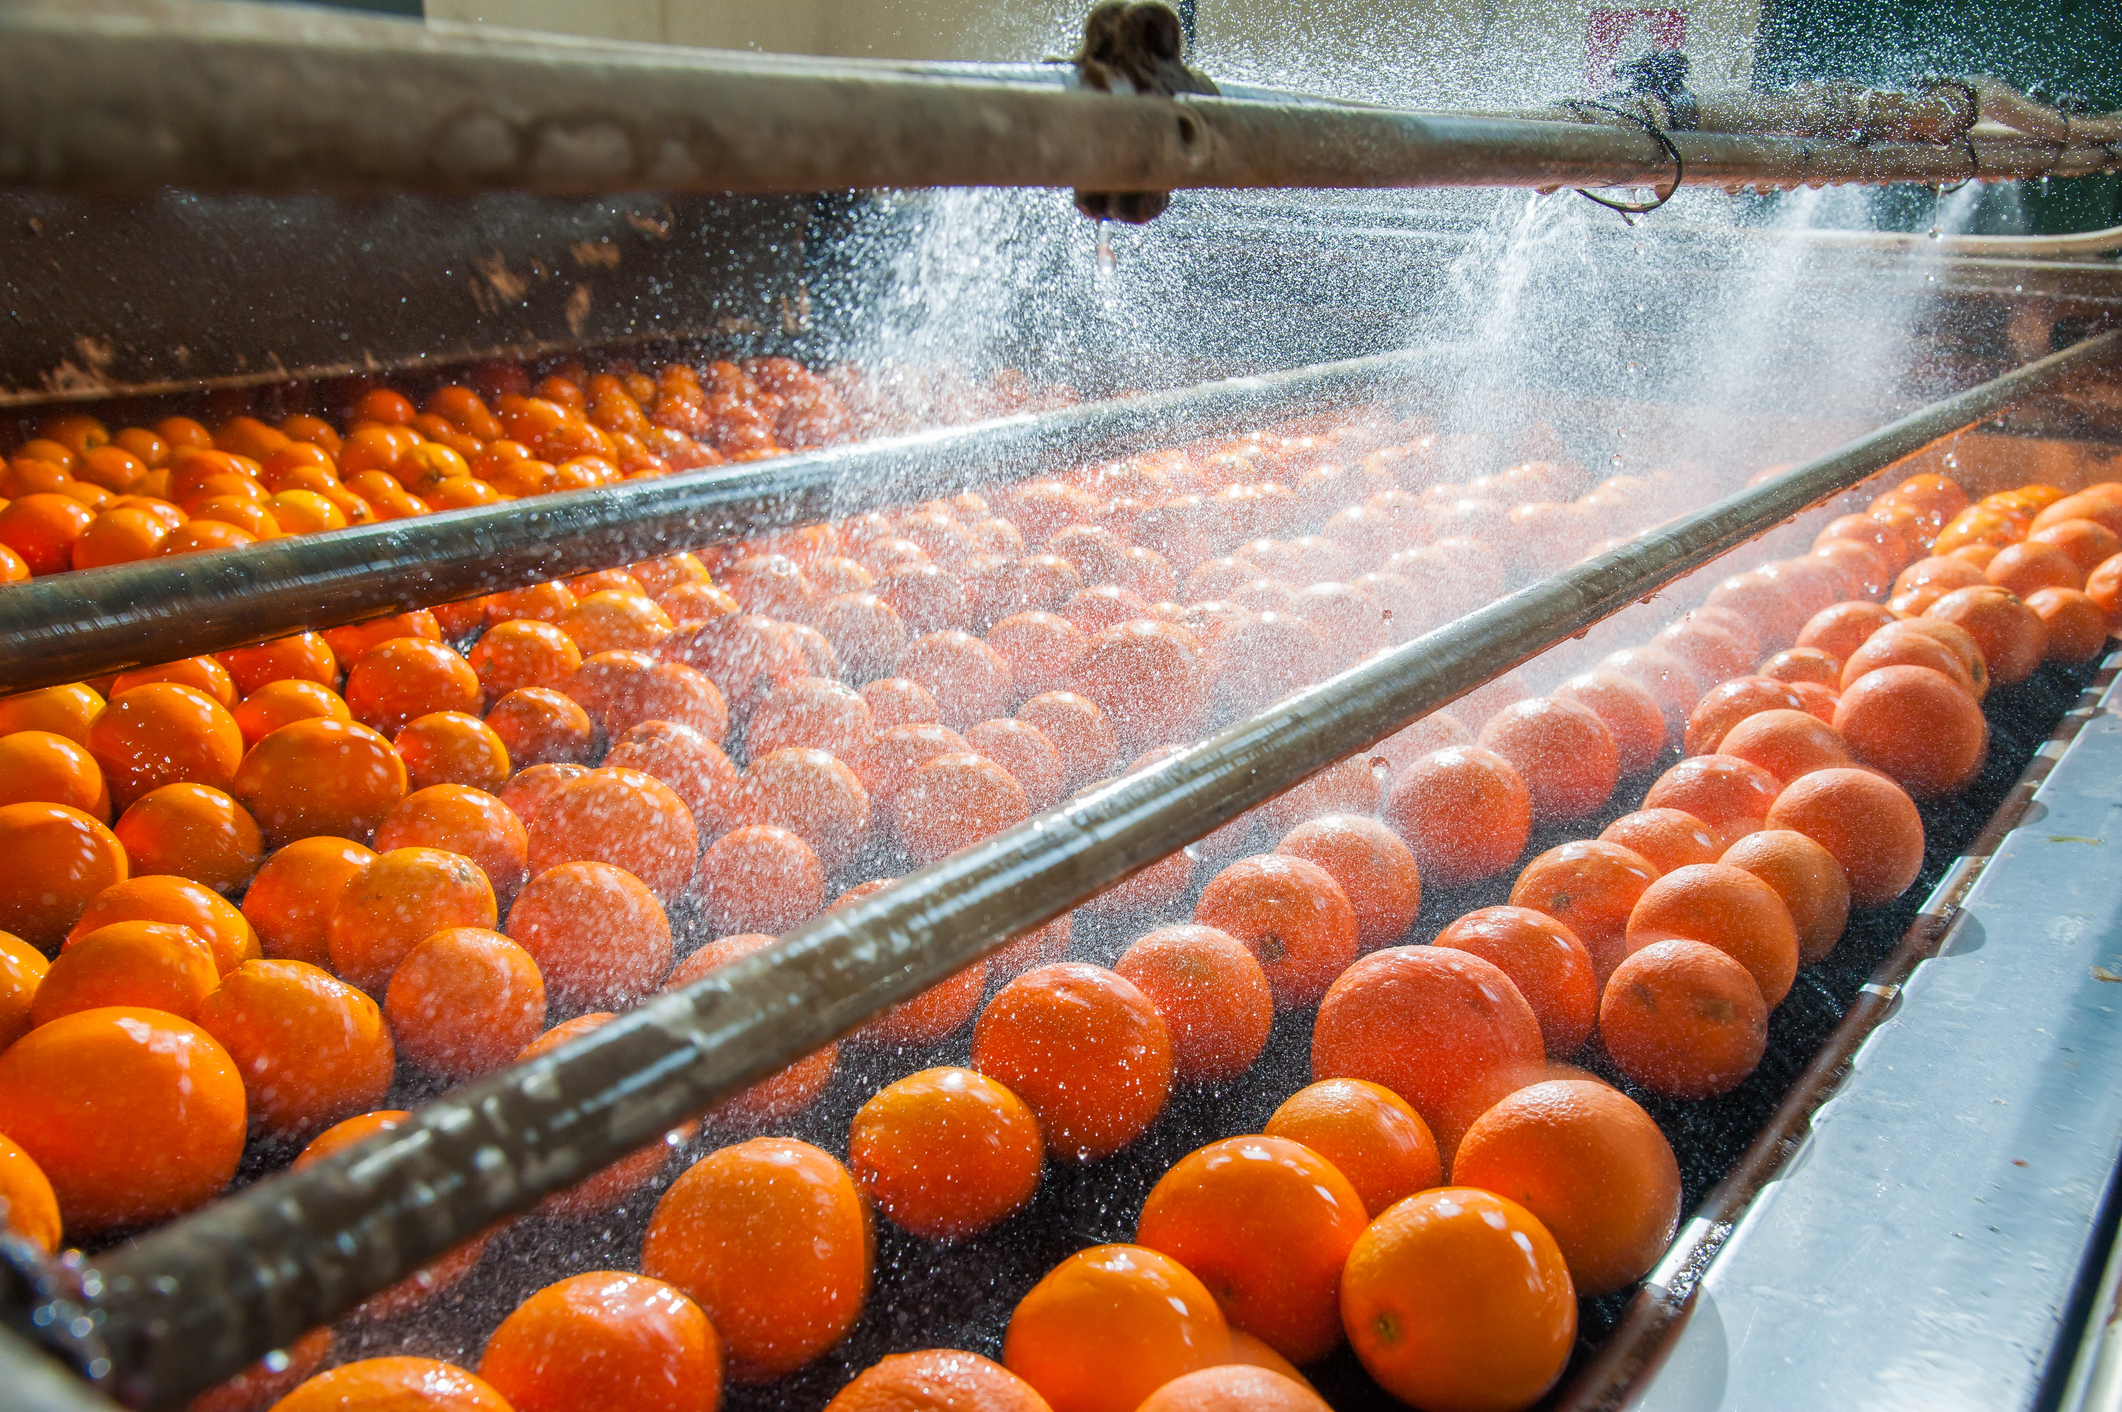 The process of washing and cleaning of citrus fruits in a modern production line (Photo: iStock - siculodoc)